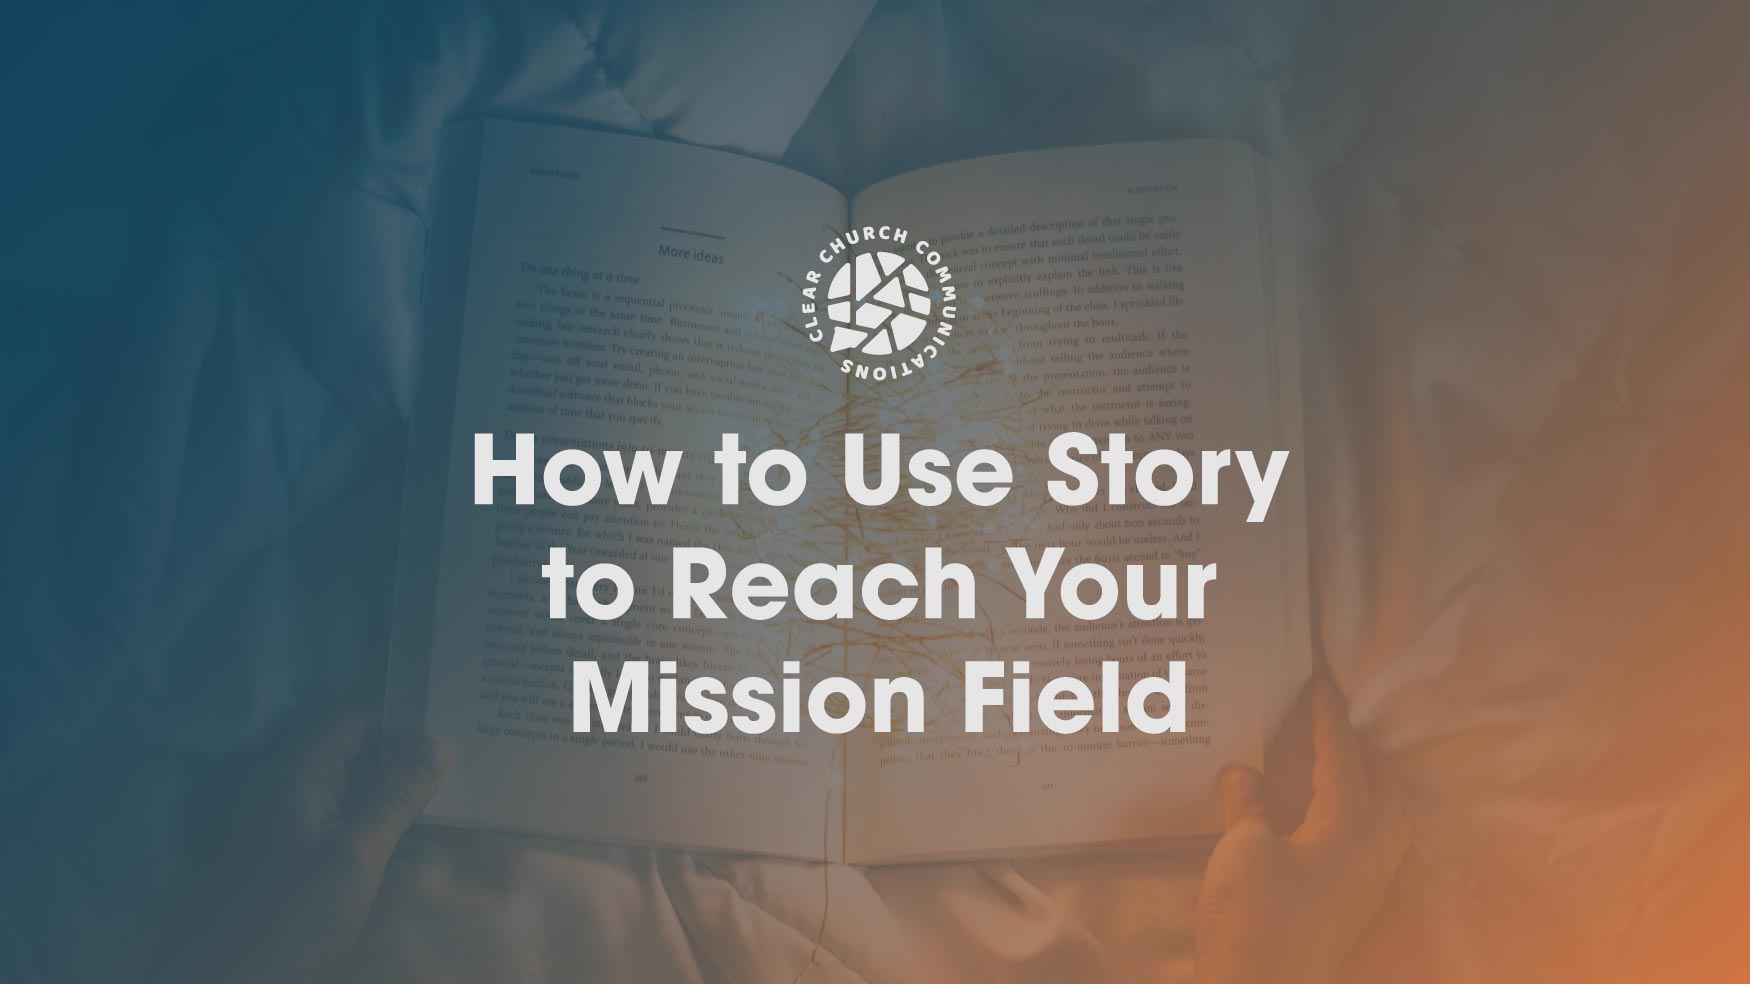 How to use story to reach your mission field